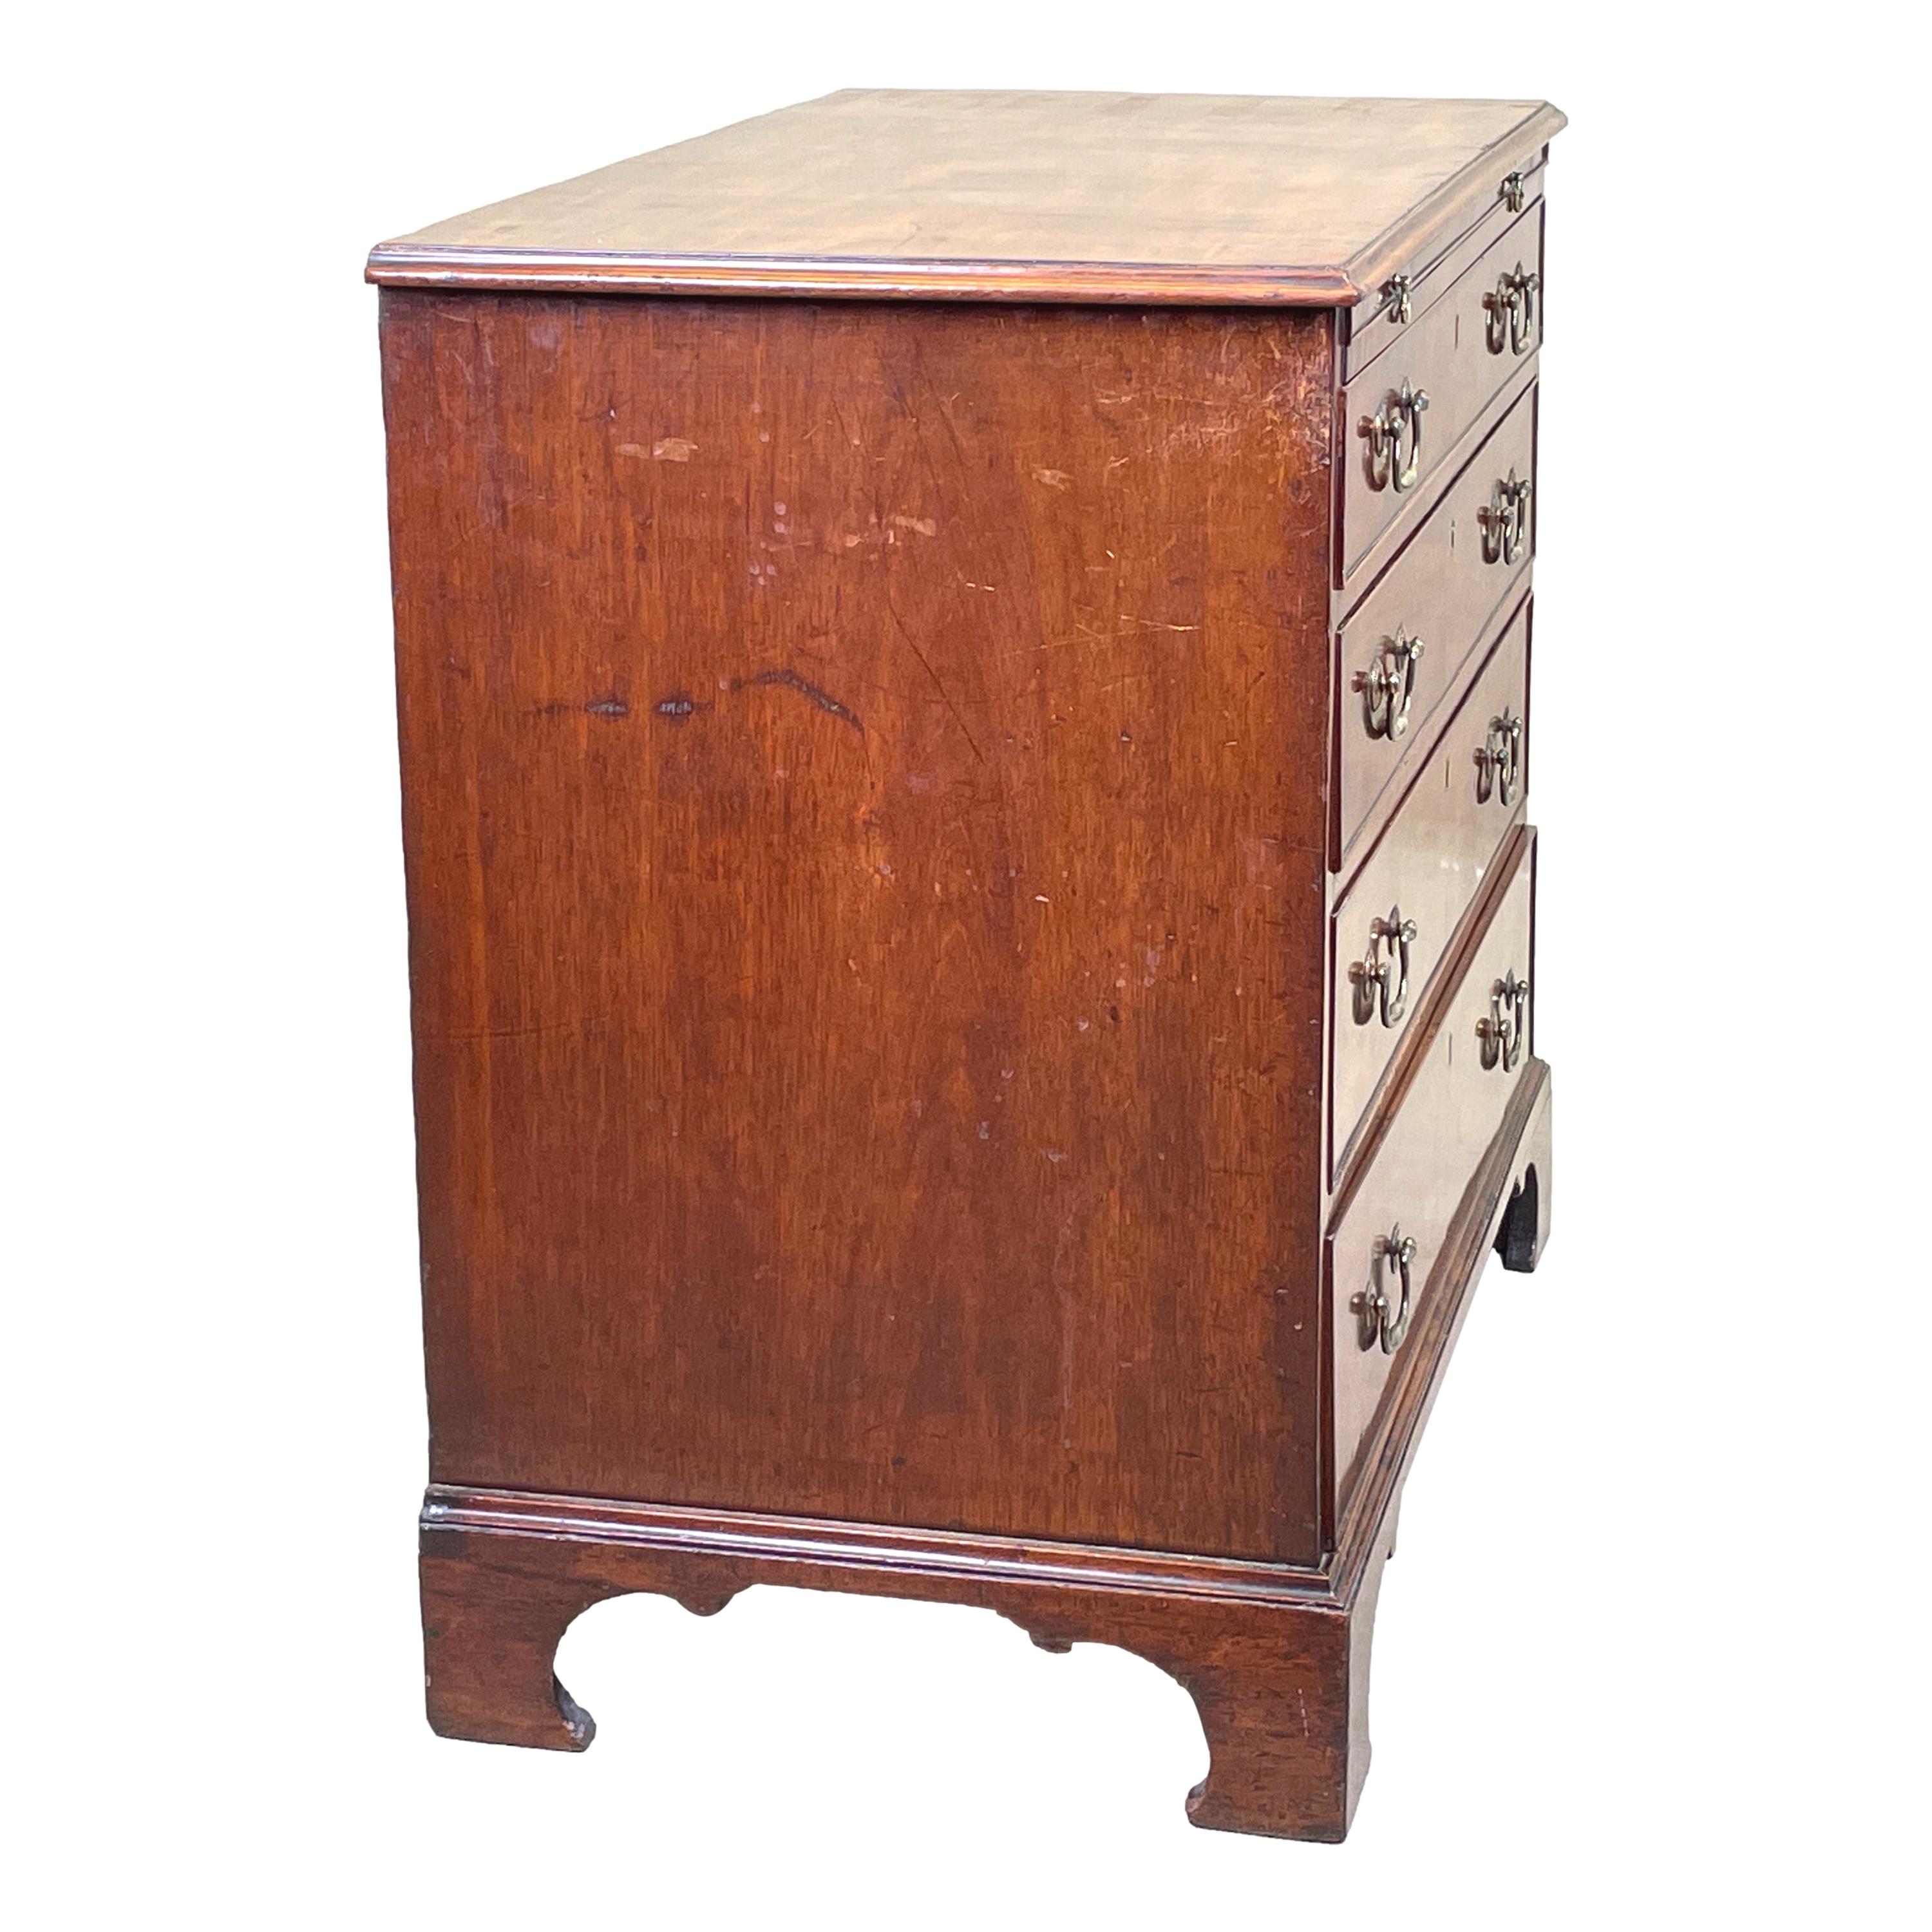 A very good quality mid 18th century chippendale period Georgian Mahogany chest, having well figured top over slide and four long drawers, retaining original brass swan neck handles, raised on elegant original shaped bracket feet.

Whilst a